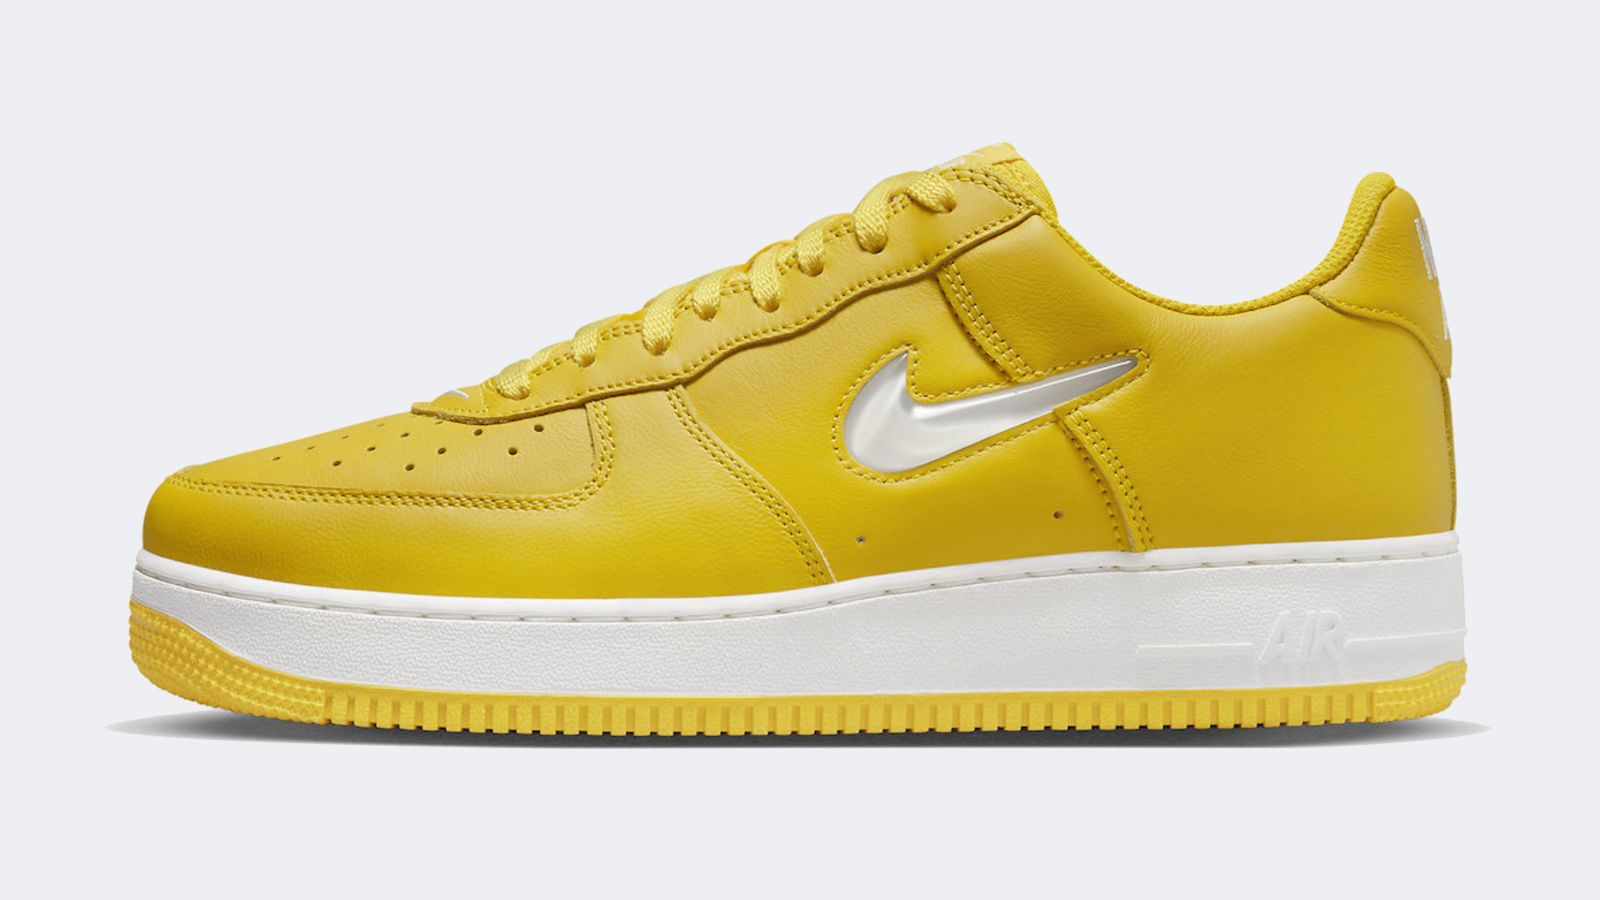 Nike Air Force 1 Low Colour of the Month "Jewel Yellow" product image of a bright yellow sneaker featuring a white midsole and small transparent Swoosh on the side.